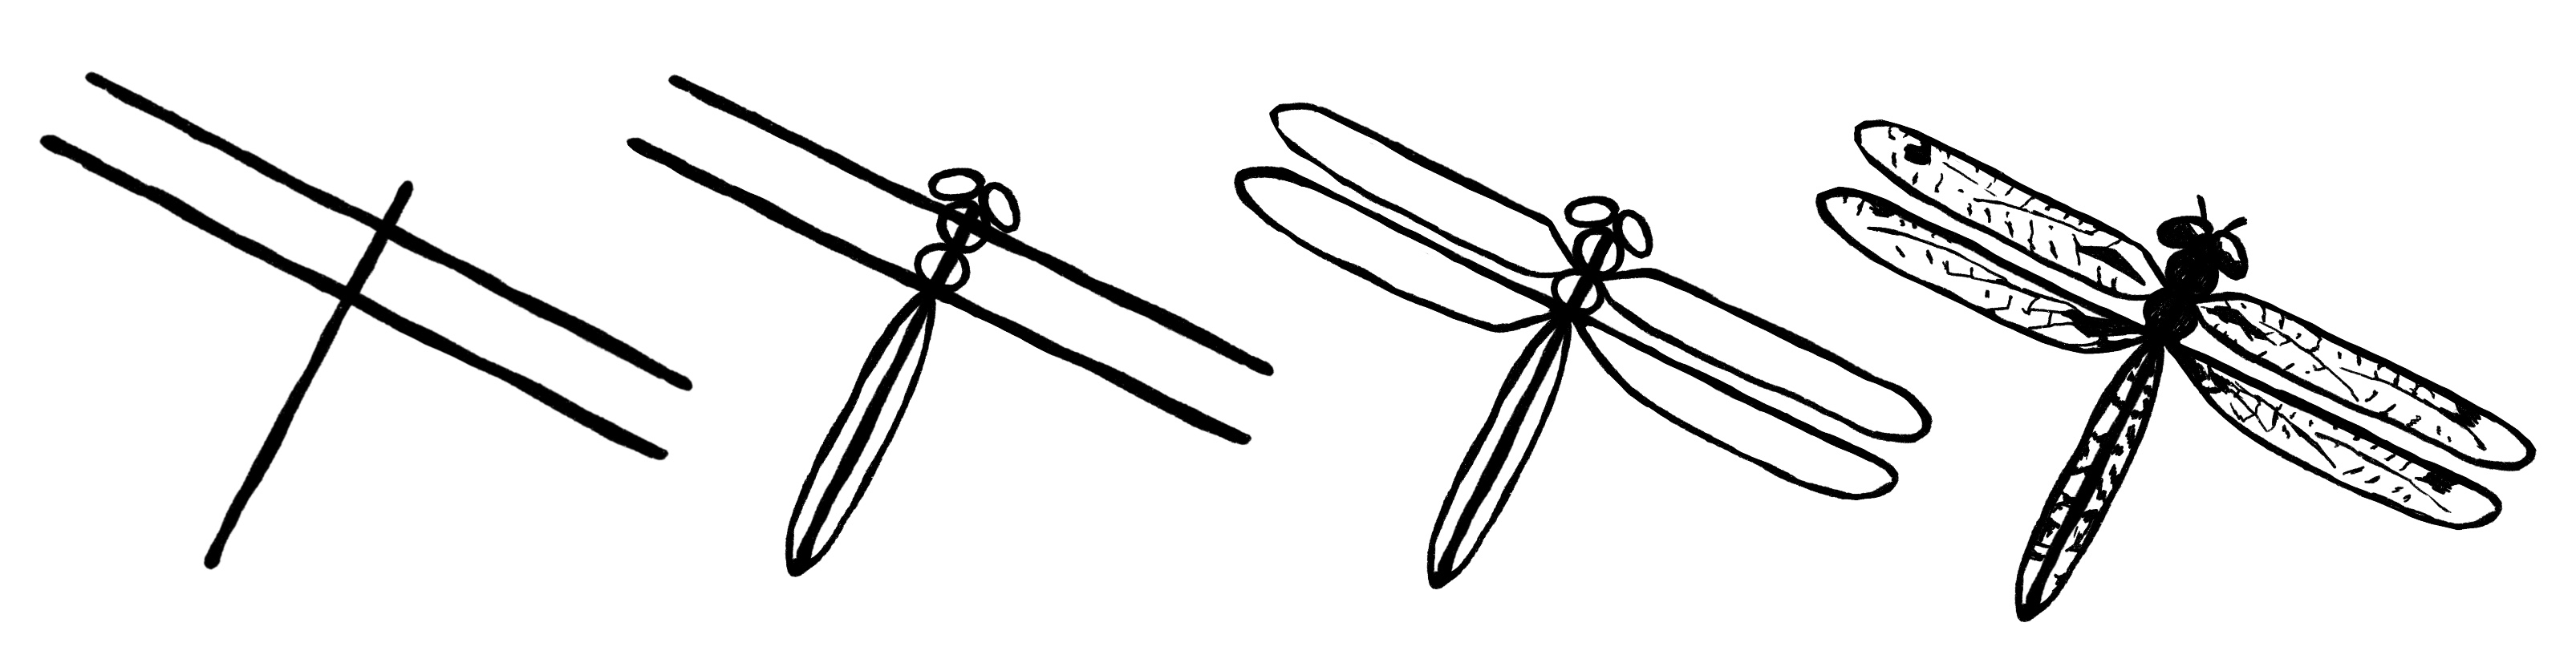 Dragonfly-Drawing-GraphicsFairy